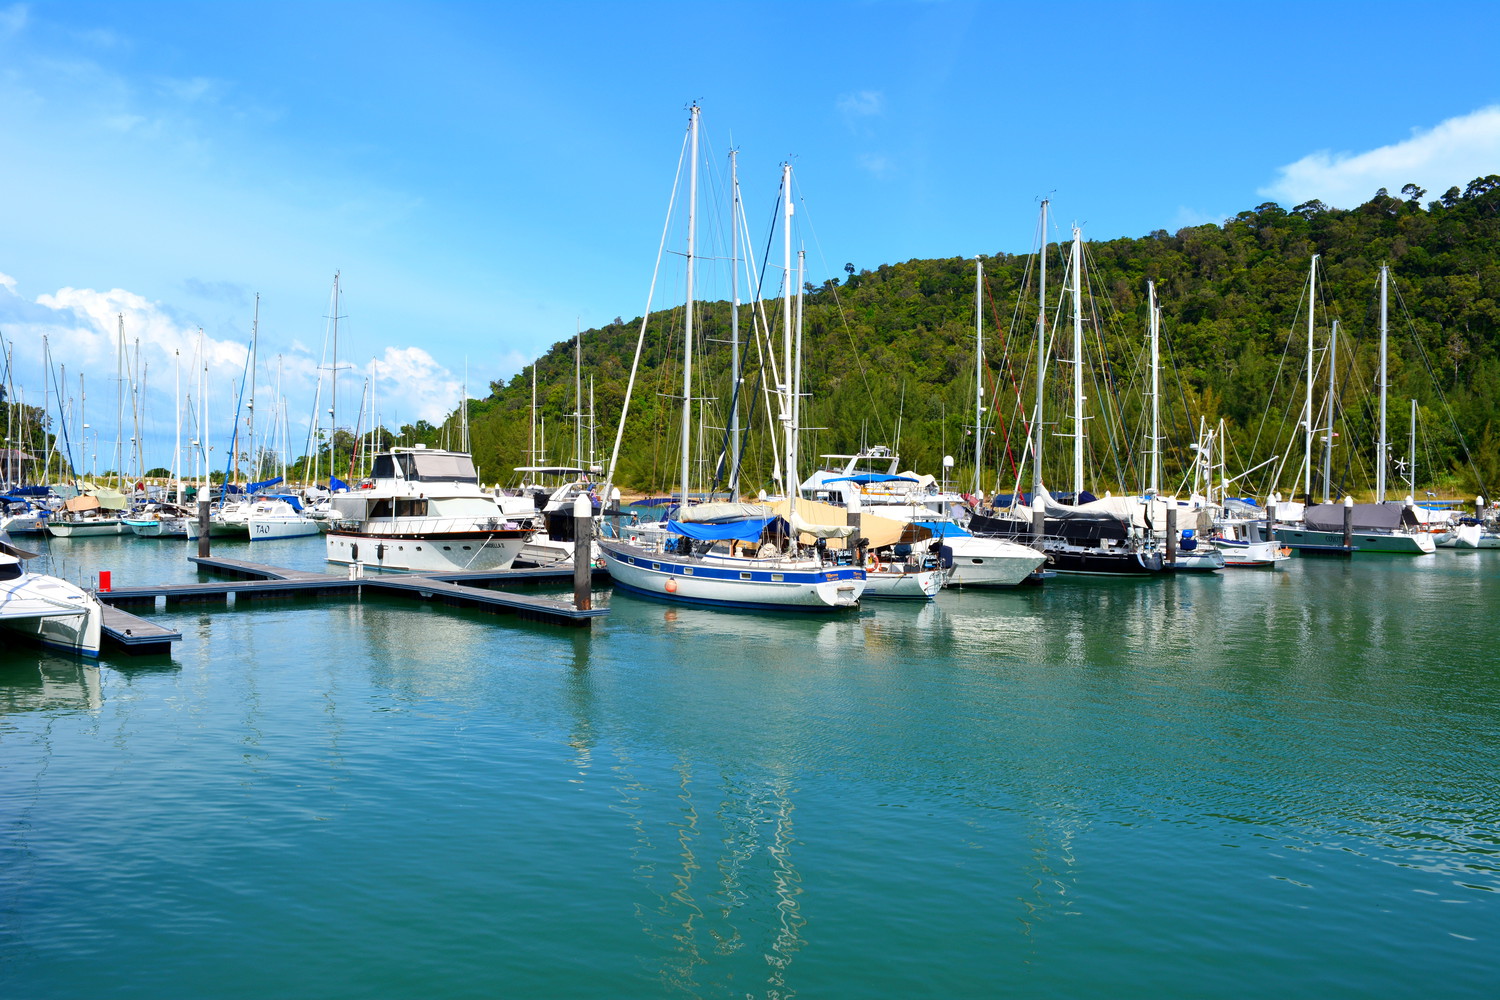 Boats docked at the Strait of Malacca with hills covered with trees visible behind